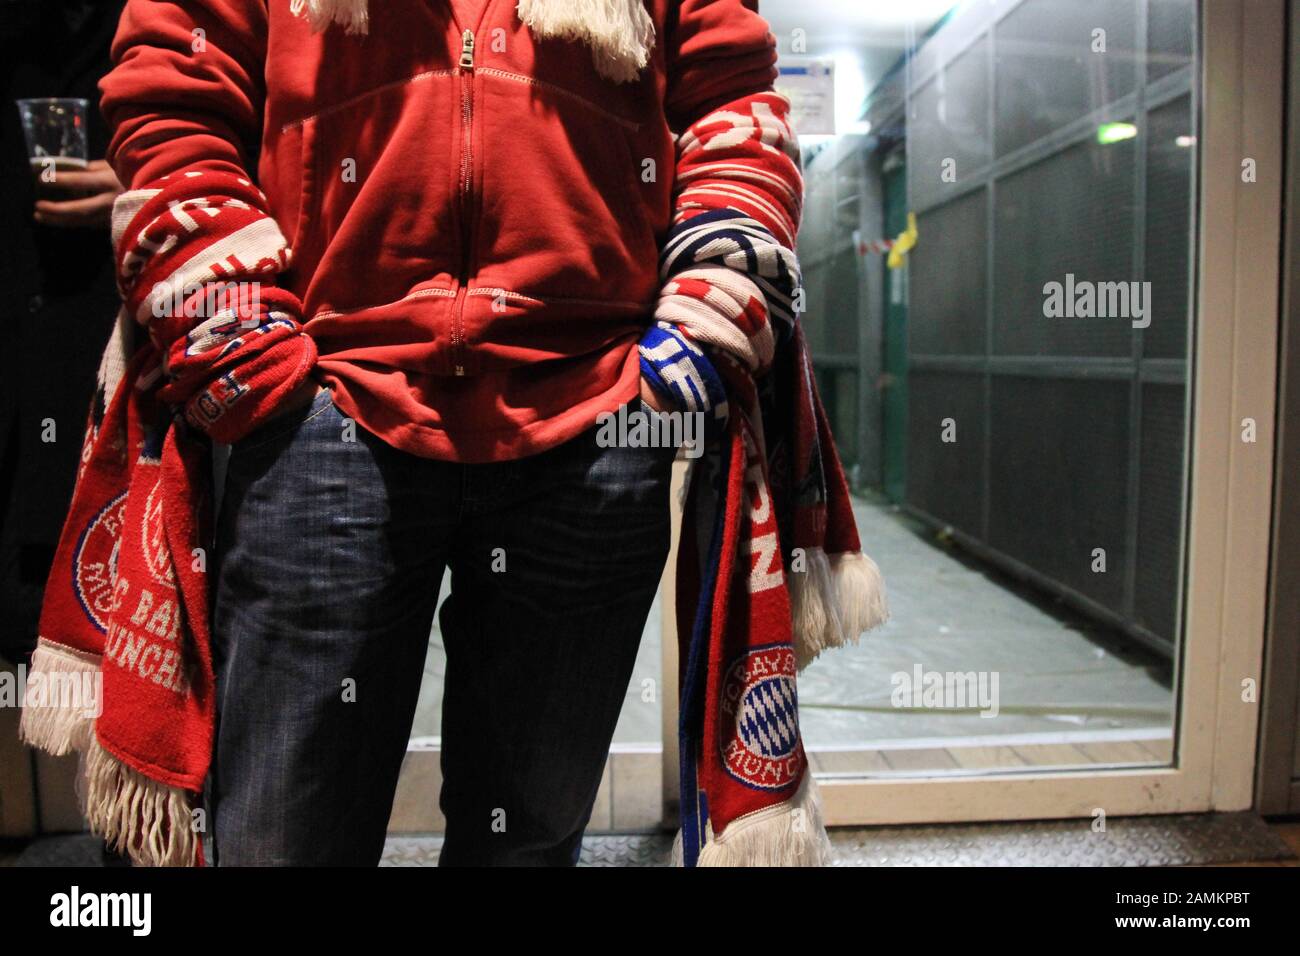 Football Champions League: FC Bayern Munich - FC Basel in the Allianz Arena, in the picture a Bayern fan on arrival at the Fröttmaning underground station. [automated translation] Stock Photo